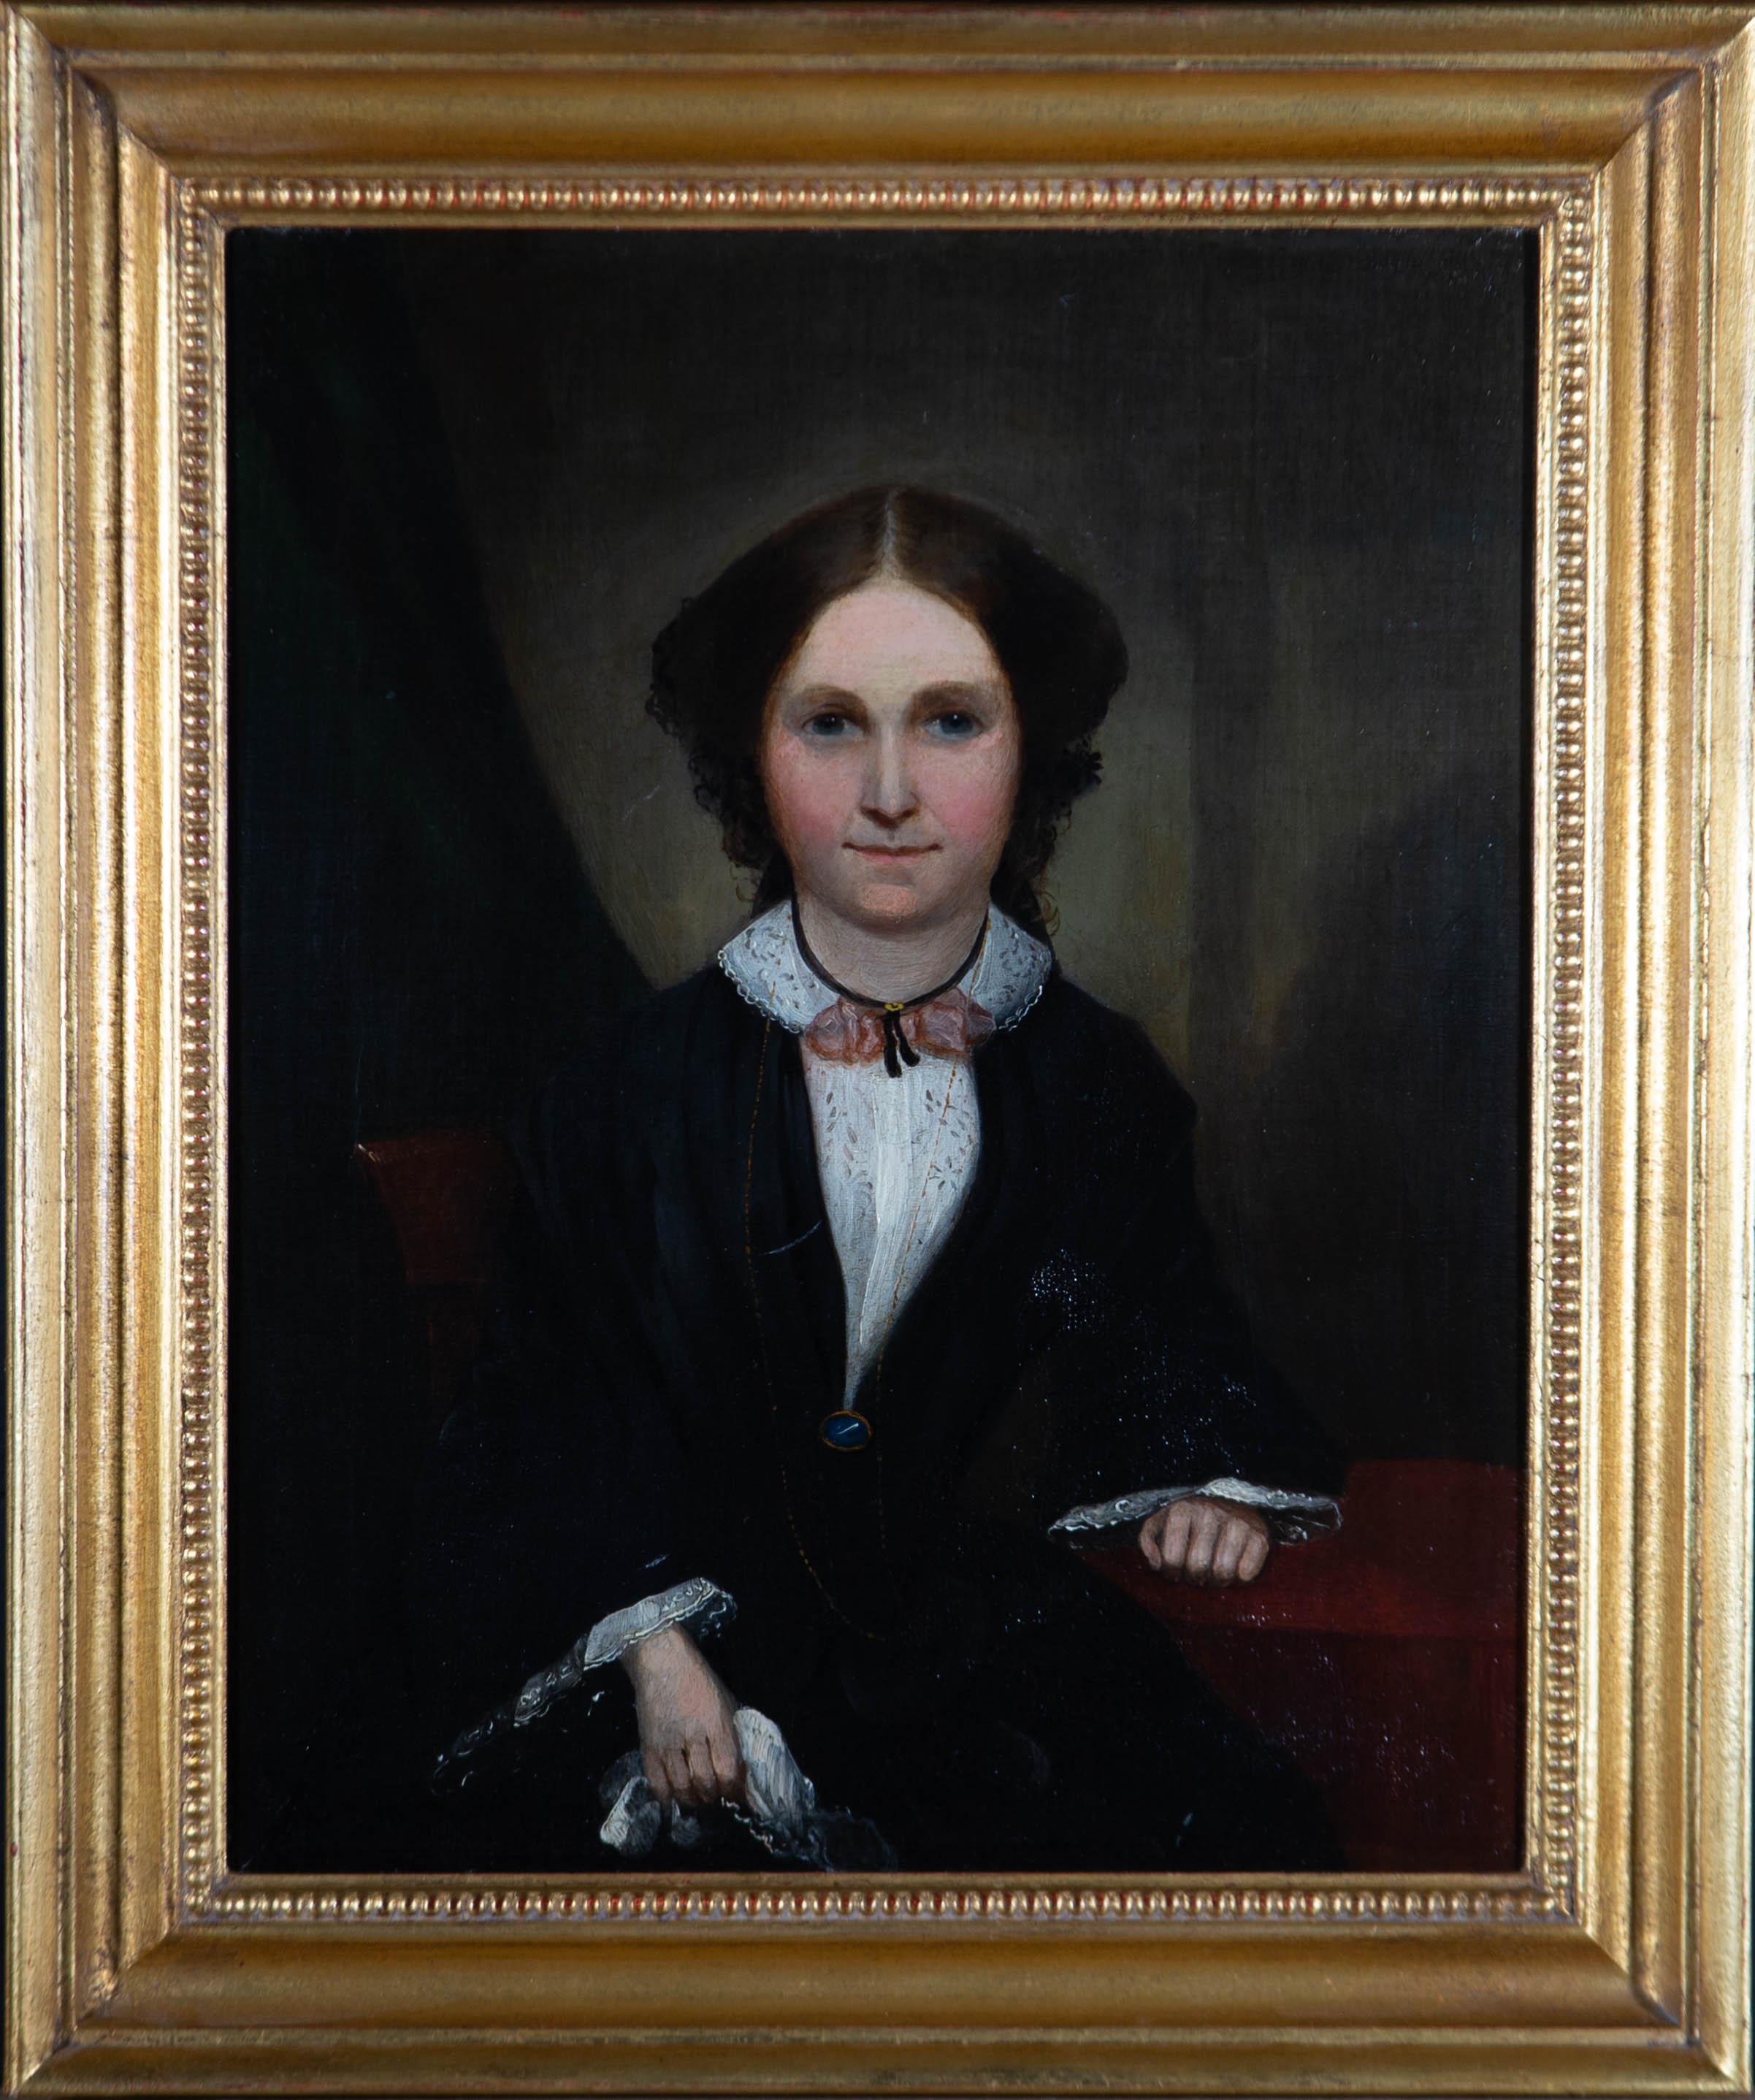 Unknown Portrait Painting - Mid 19th Century Oil - Portrait of a Victorian Lady